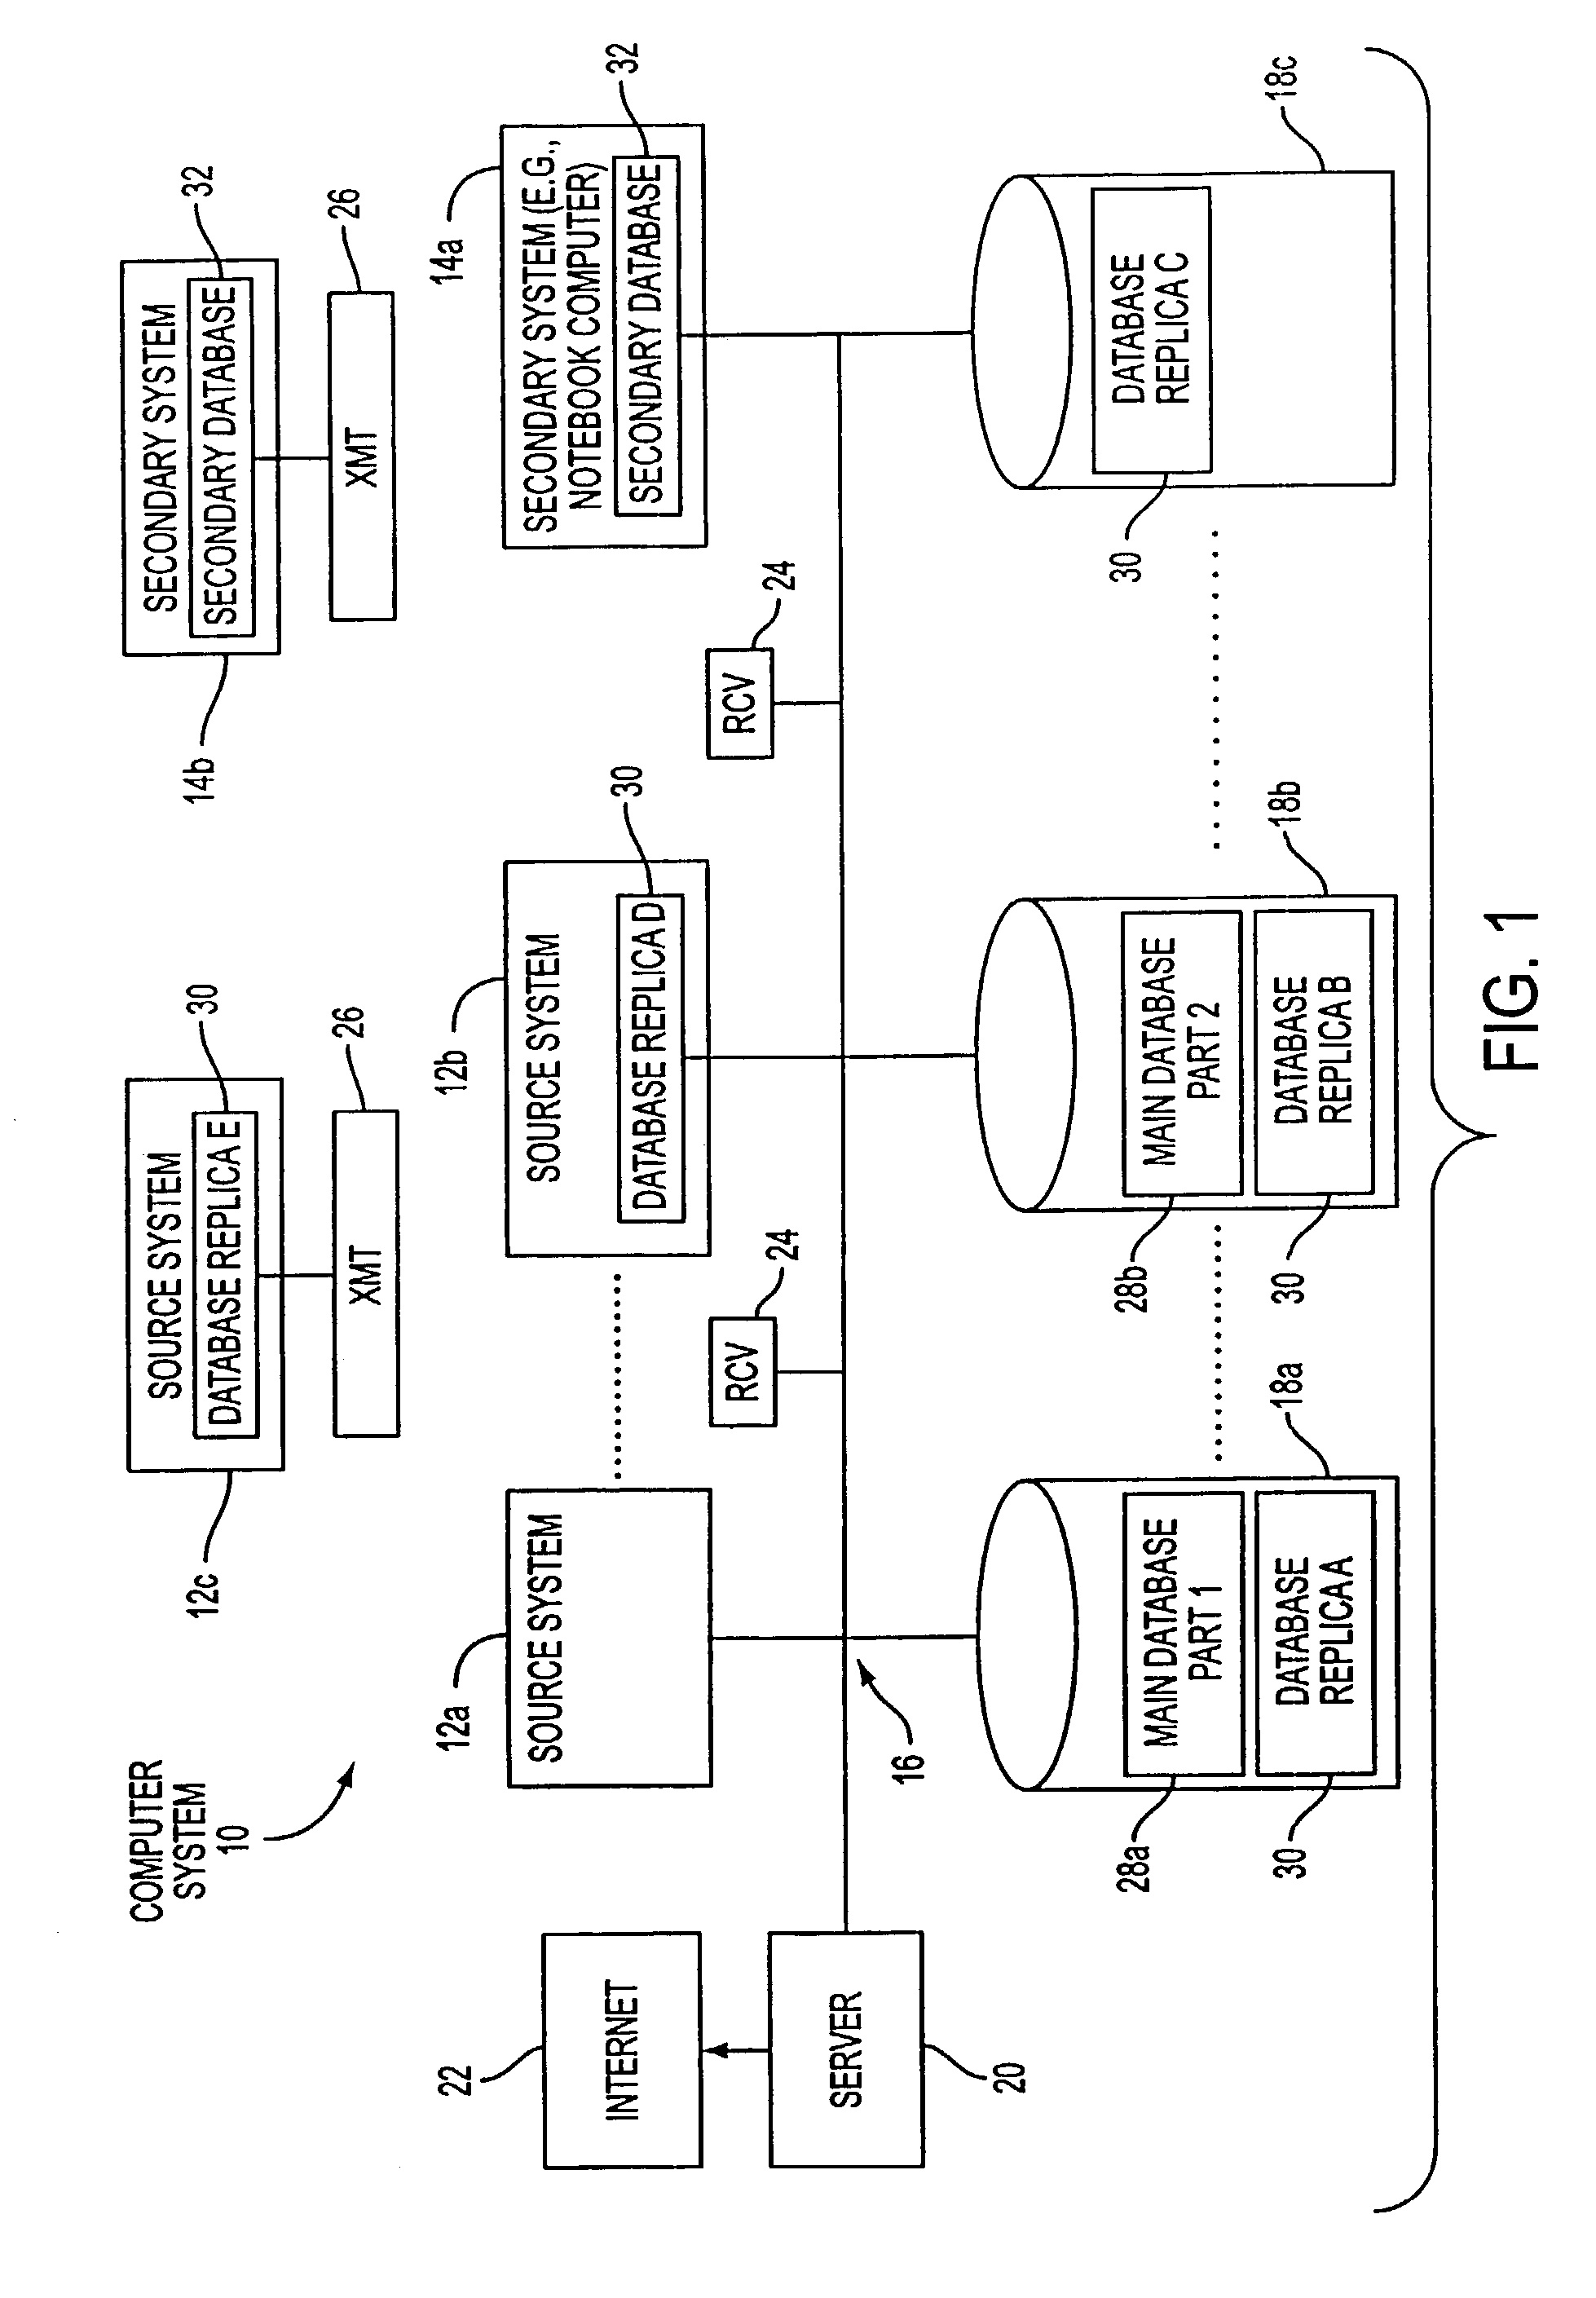 System and method for synchronizing data in multiple databases